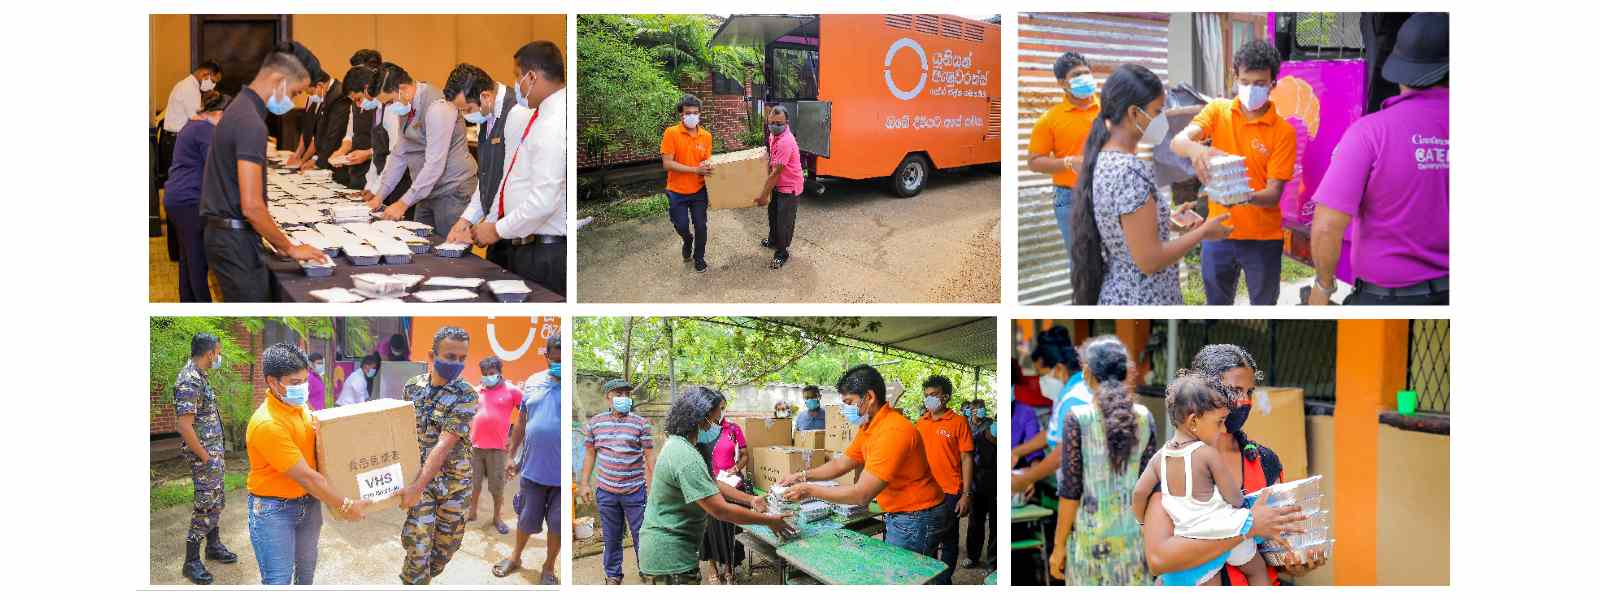 Union Assurance & Cinnamon Hotels Provides Over 3,000 Meals to Flood Victims